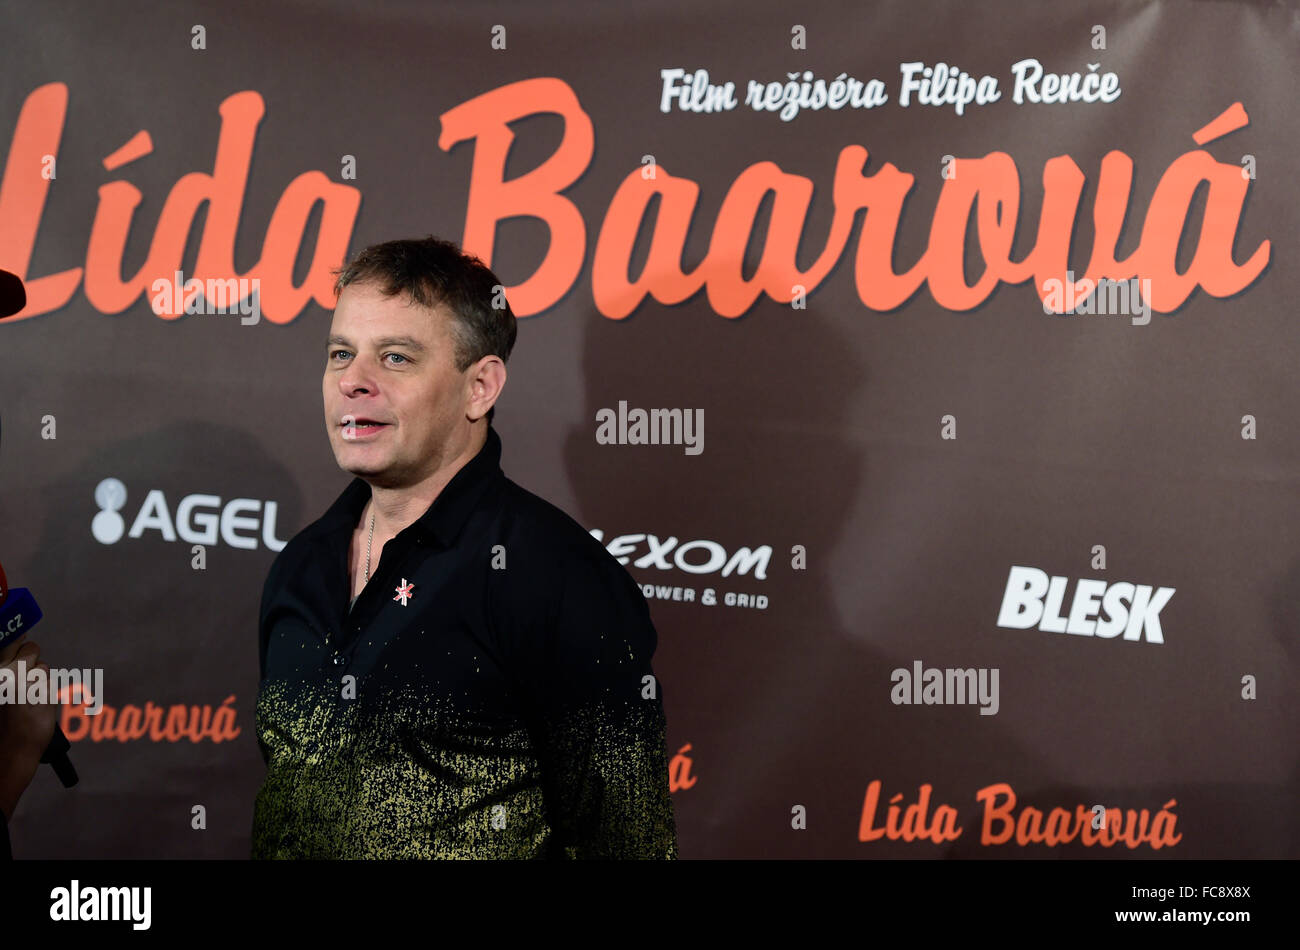 A new Czech film about star actress Lida Baarova, who was mistress of the Nazi Germany Propaganda Minister Joseph Goebbels before the war, had its official premiere in Prague this evening and it will be presented by cinemas all over the country as of Thursday. The film's English title is The Devil's Mistress. Film director Filip Renc, photo, told CTK that the screenplay is not a life story of Baarova as it shows only a part of her life from 1936 to the era after World War Two. Renc, 50, was among the personalities whom President Milos Zeman awarded on national holiday, October 28, 2014. Some c Stock Photo